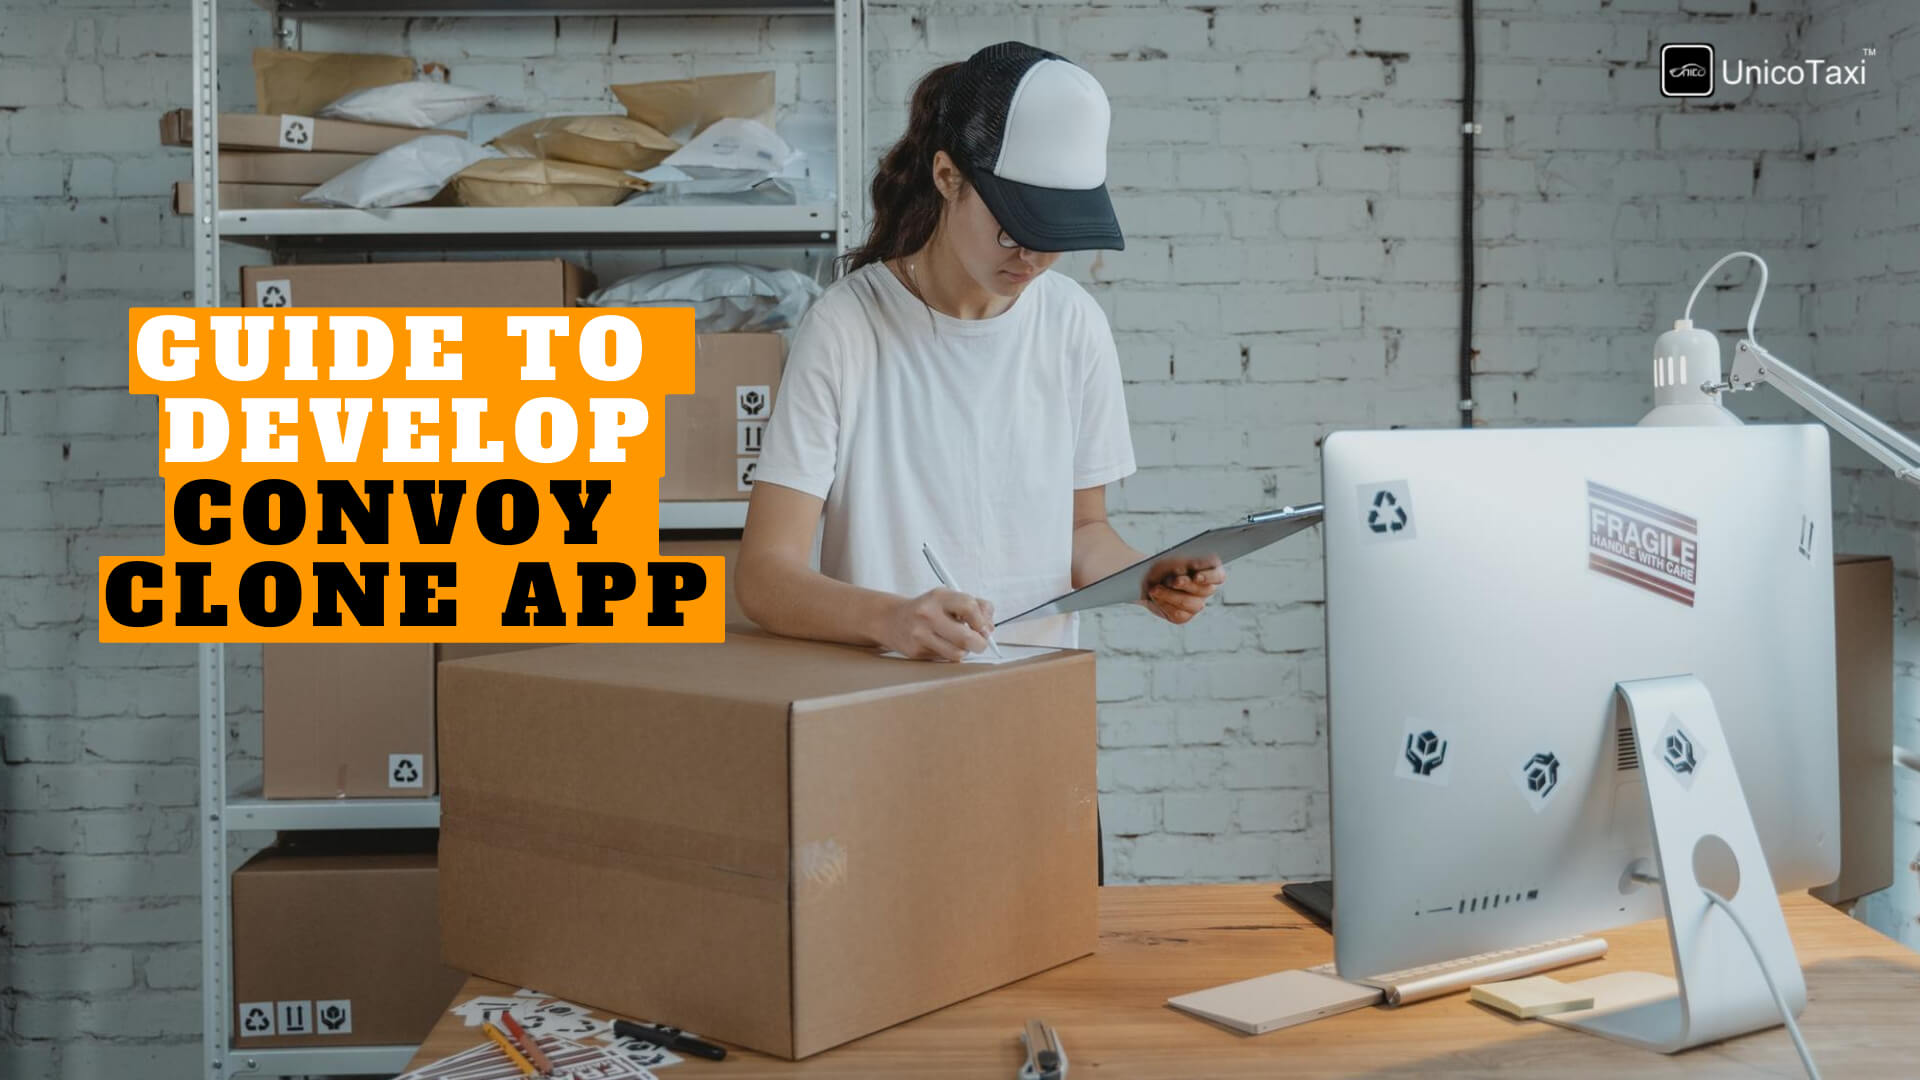 Step by Step Guide to Develop a Convoy App Clone